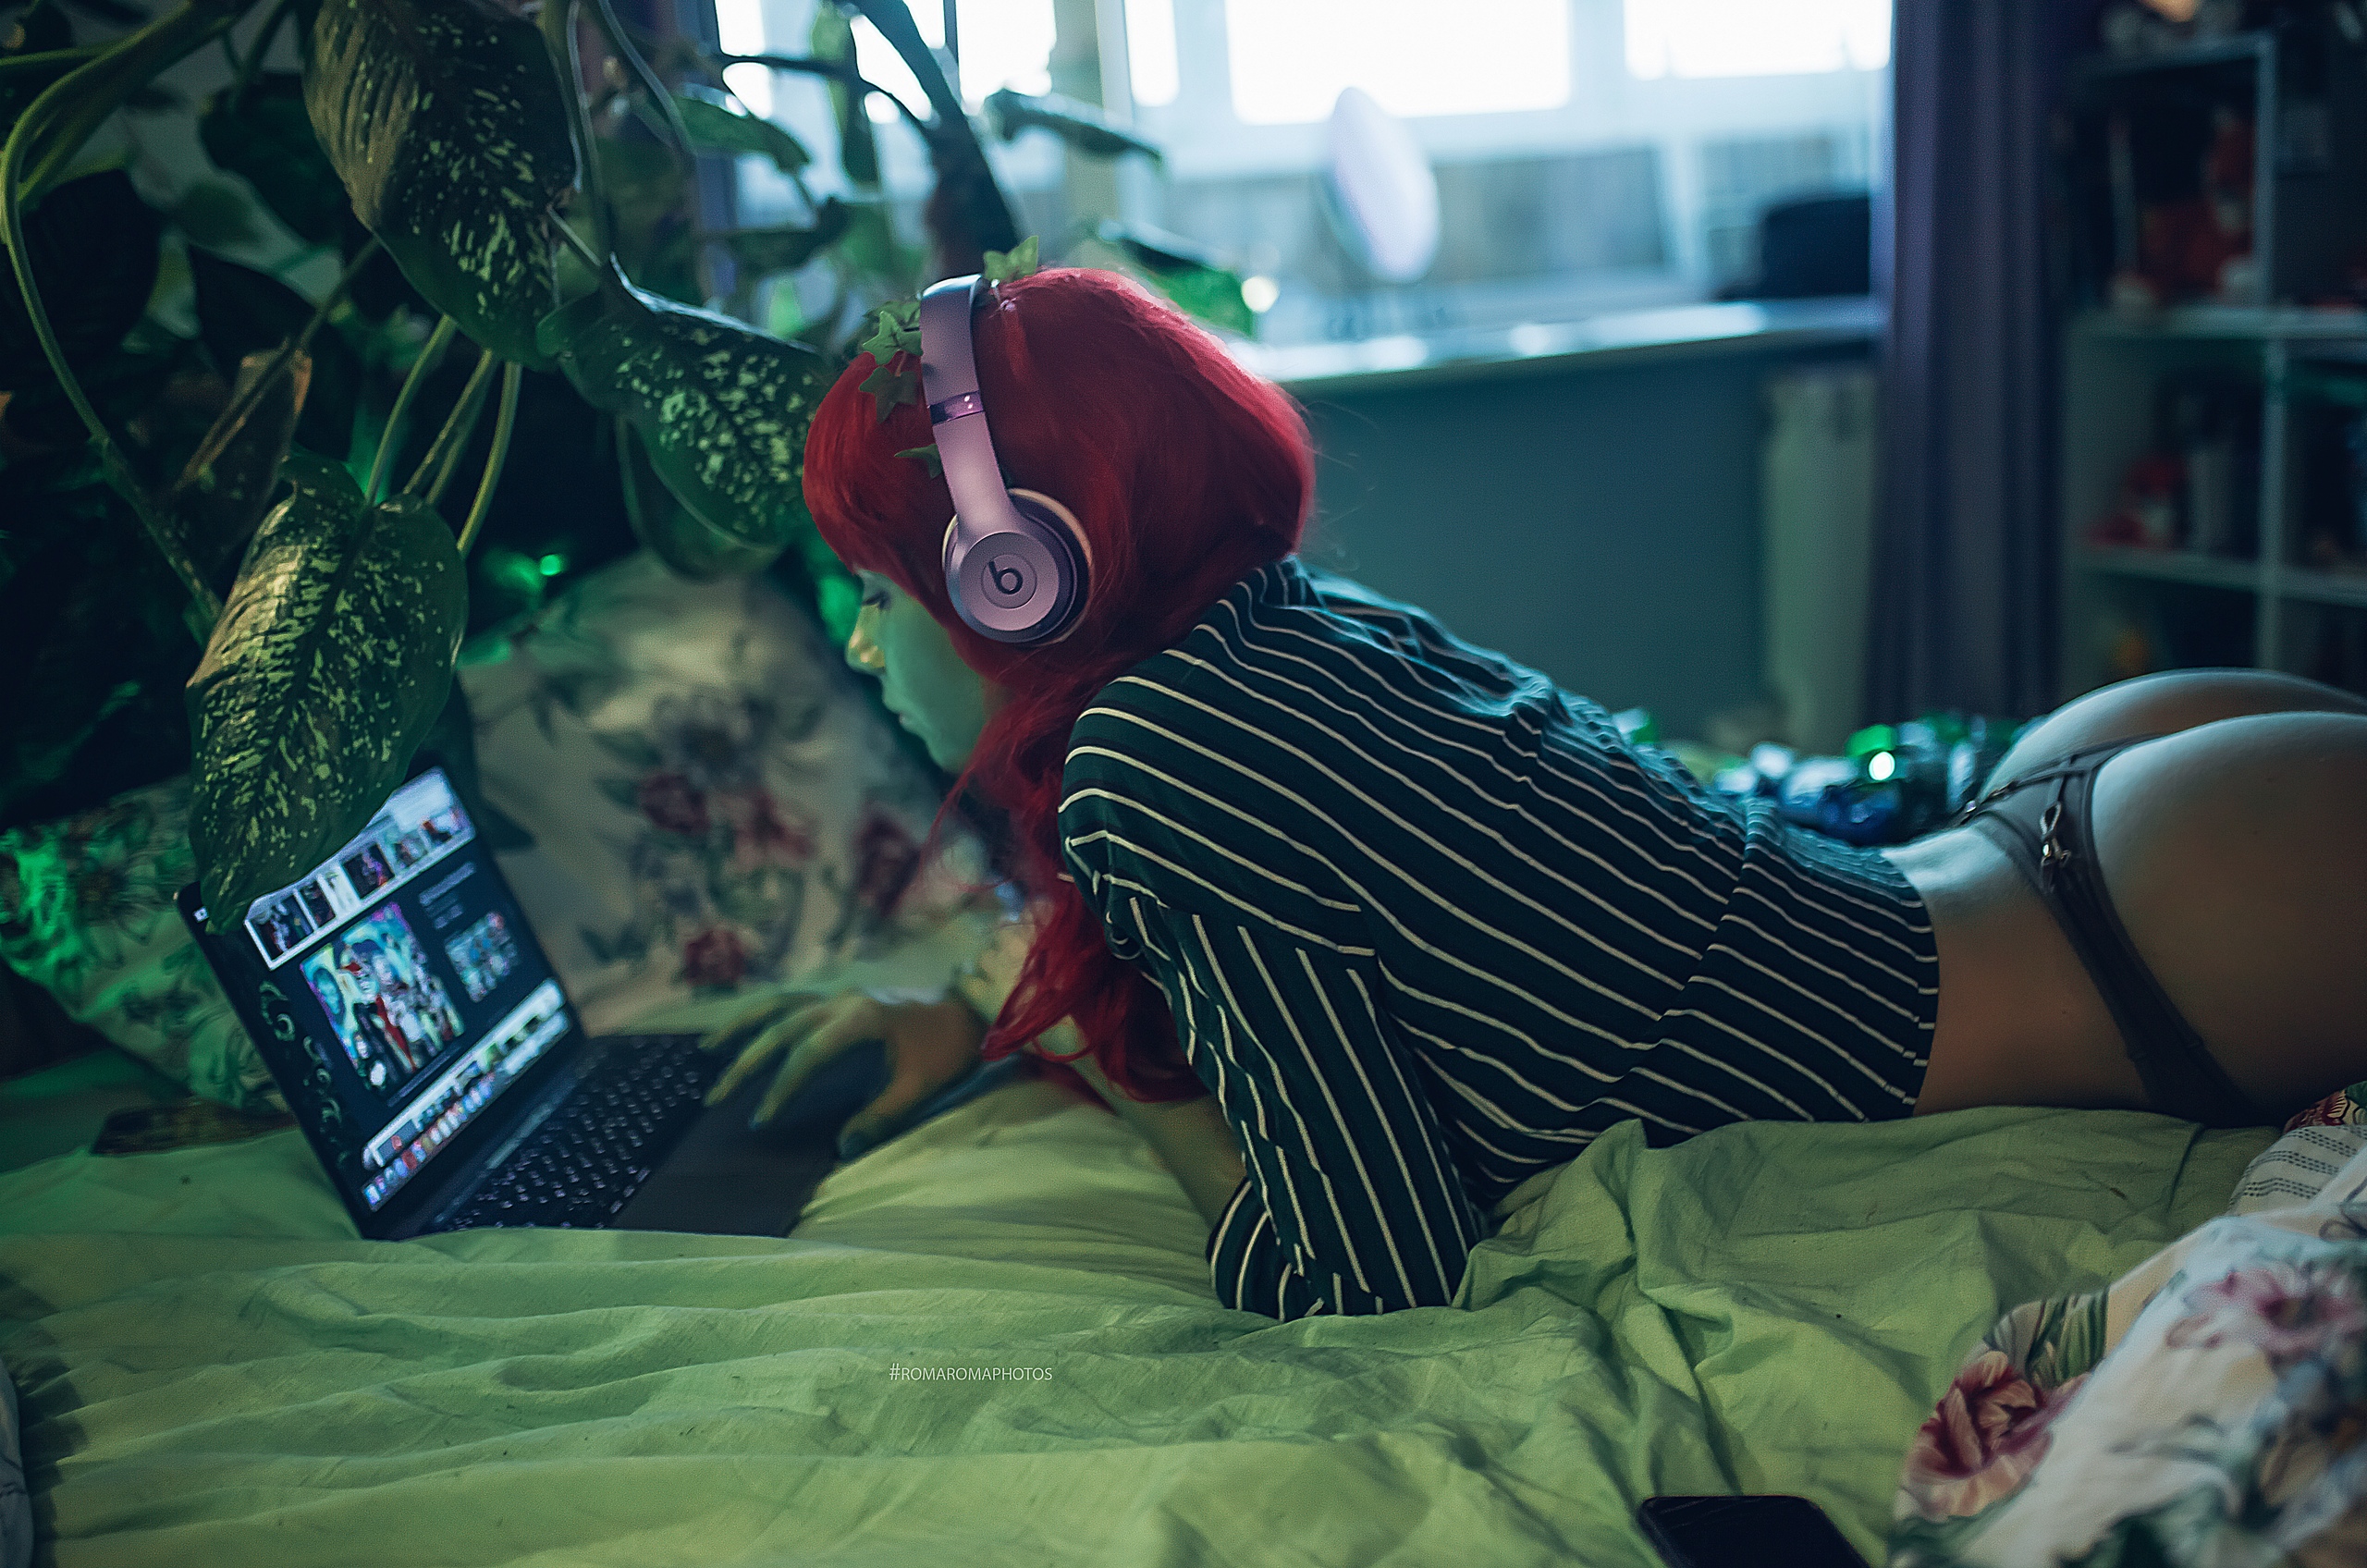 People 2560x1696 Inga Sunagatullina Roma Roma women model redhead Poison Ivy panties ass lying on front laptop in bed shirt headphones side view profile cosplay computer watermarked